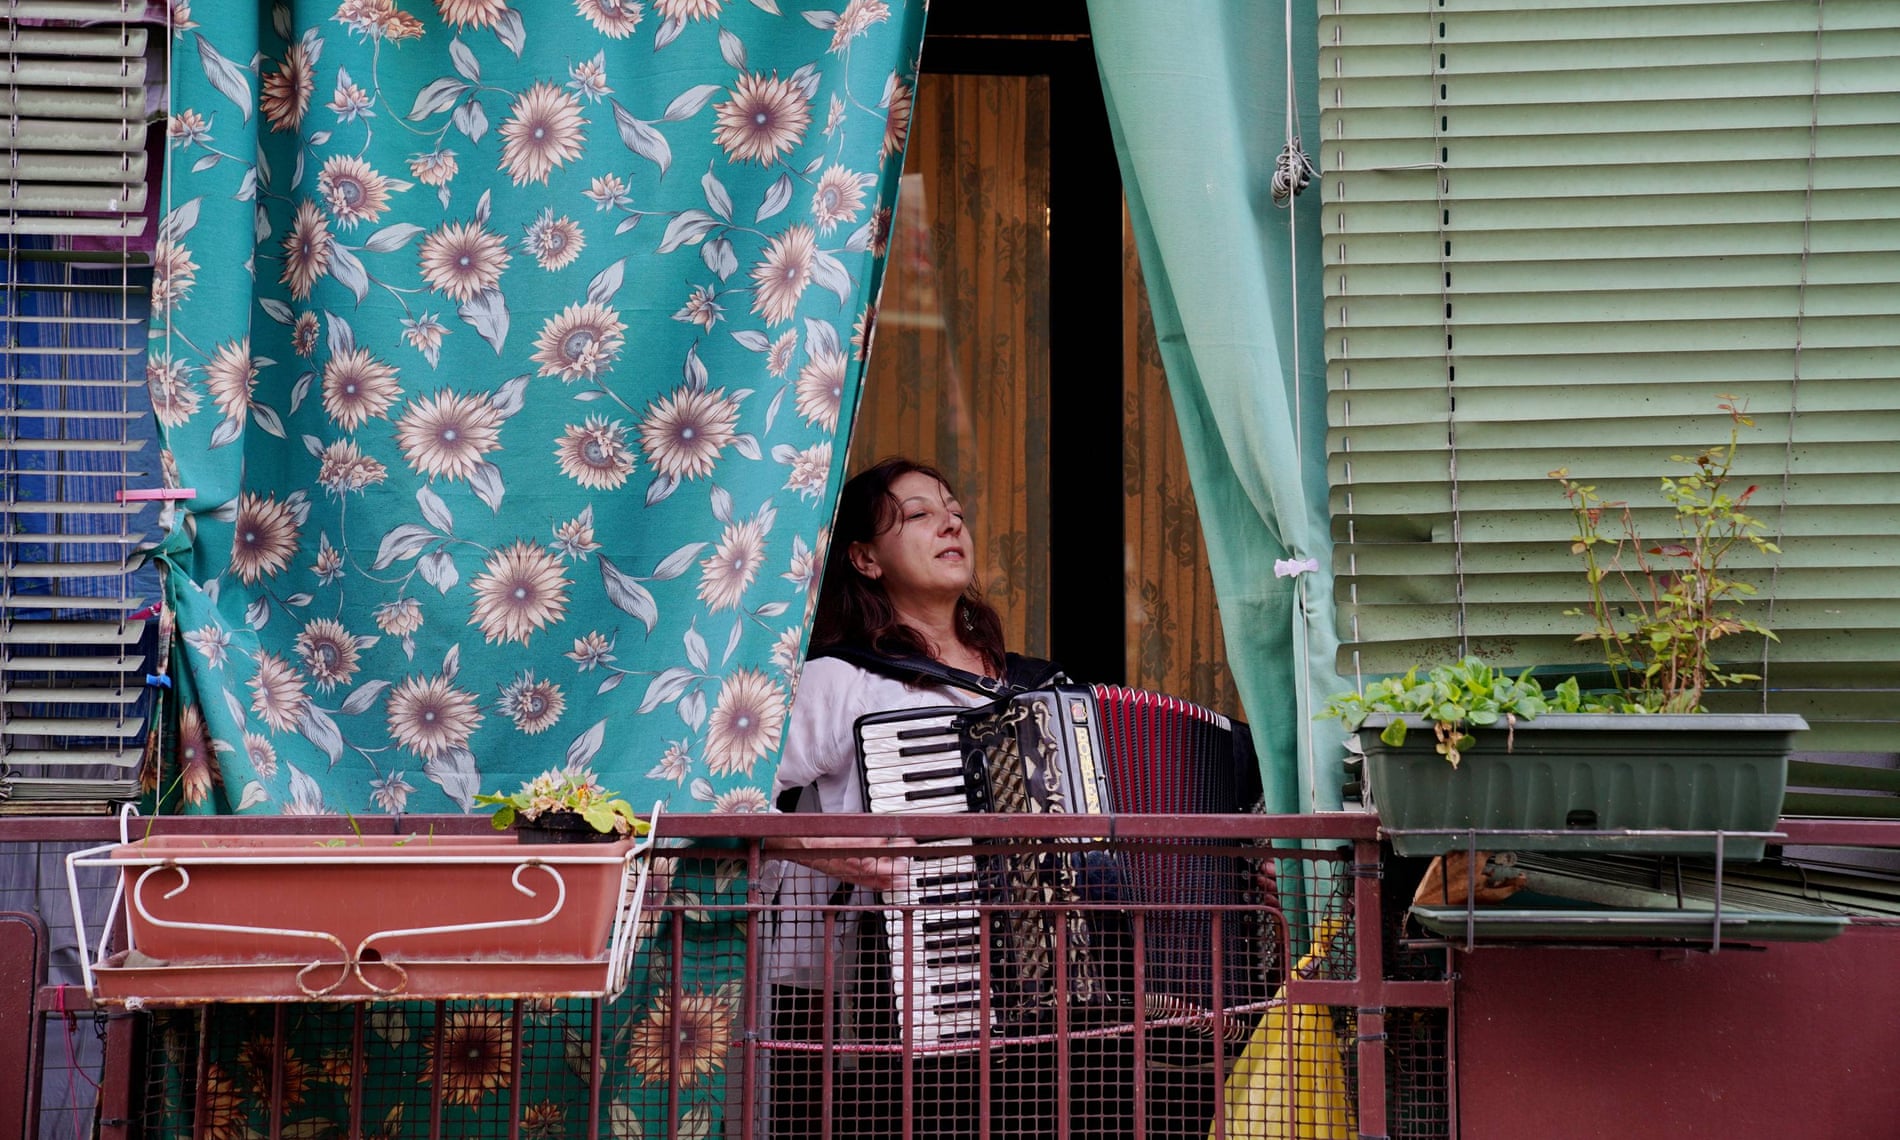 A woman plays the accordion on the balcony of her home in Milan, as part of a movement throughout Italy attempting to bring people together and lift spirits during the coronavirus lockdown.